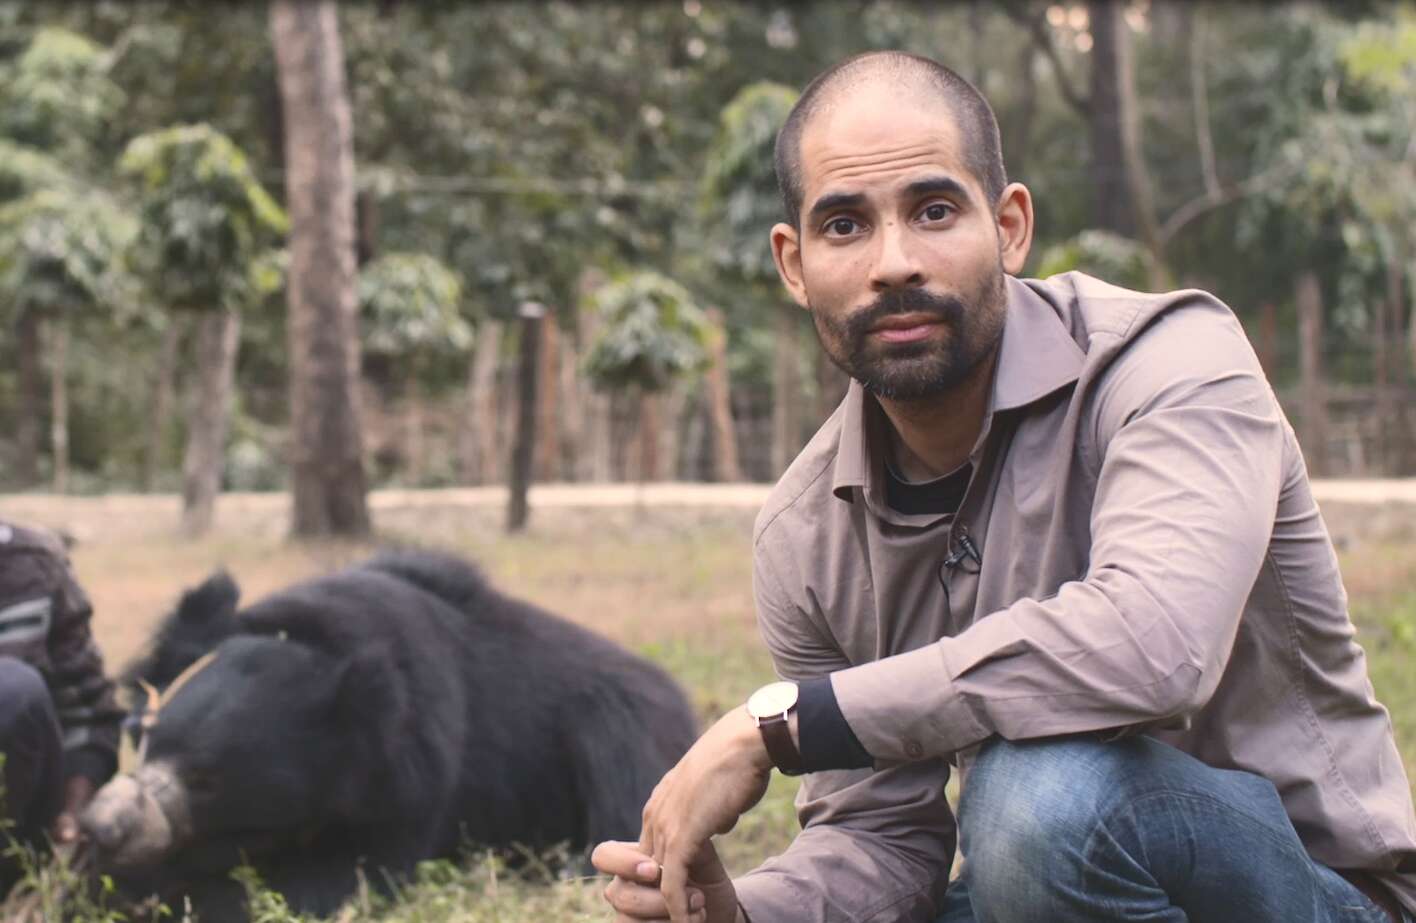 Man posing with bear at forest reserve